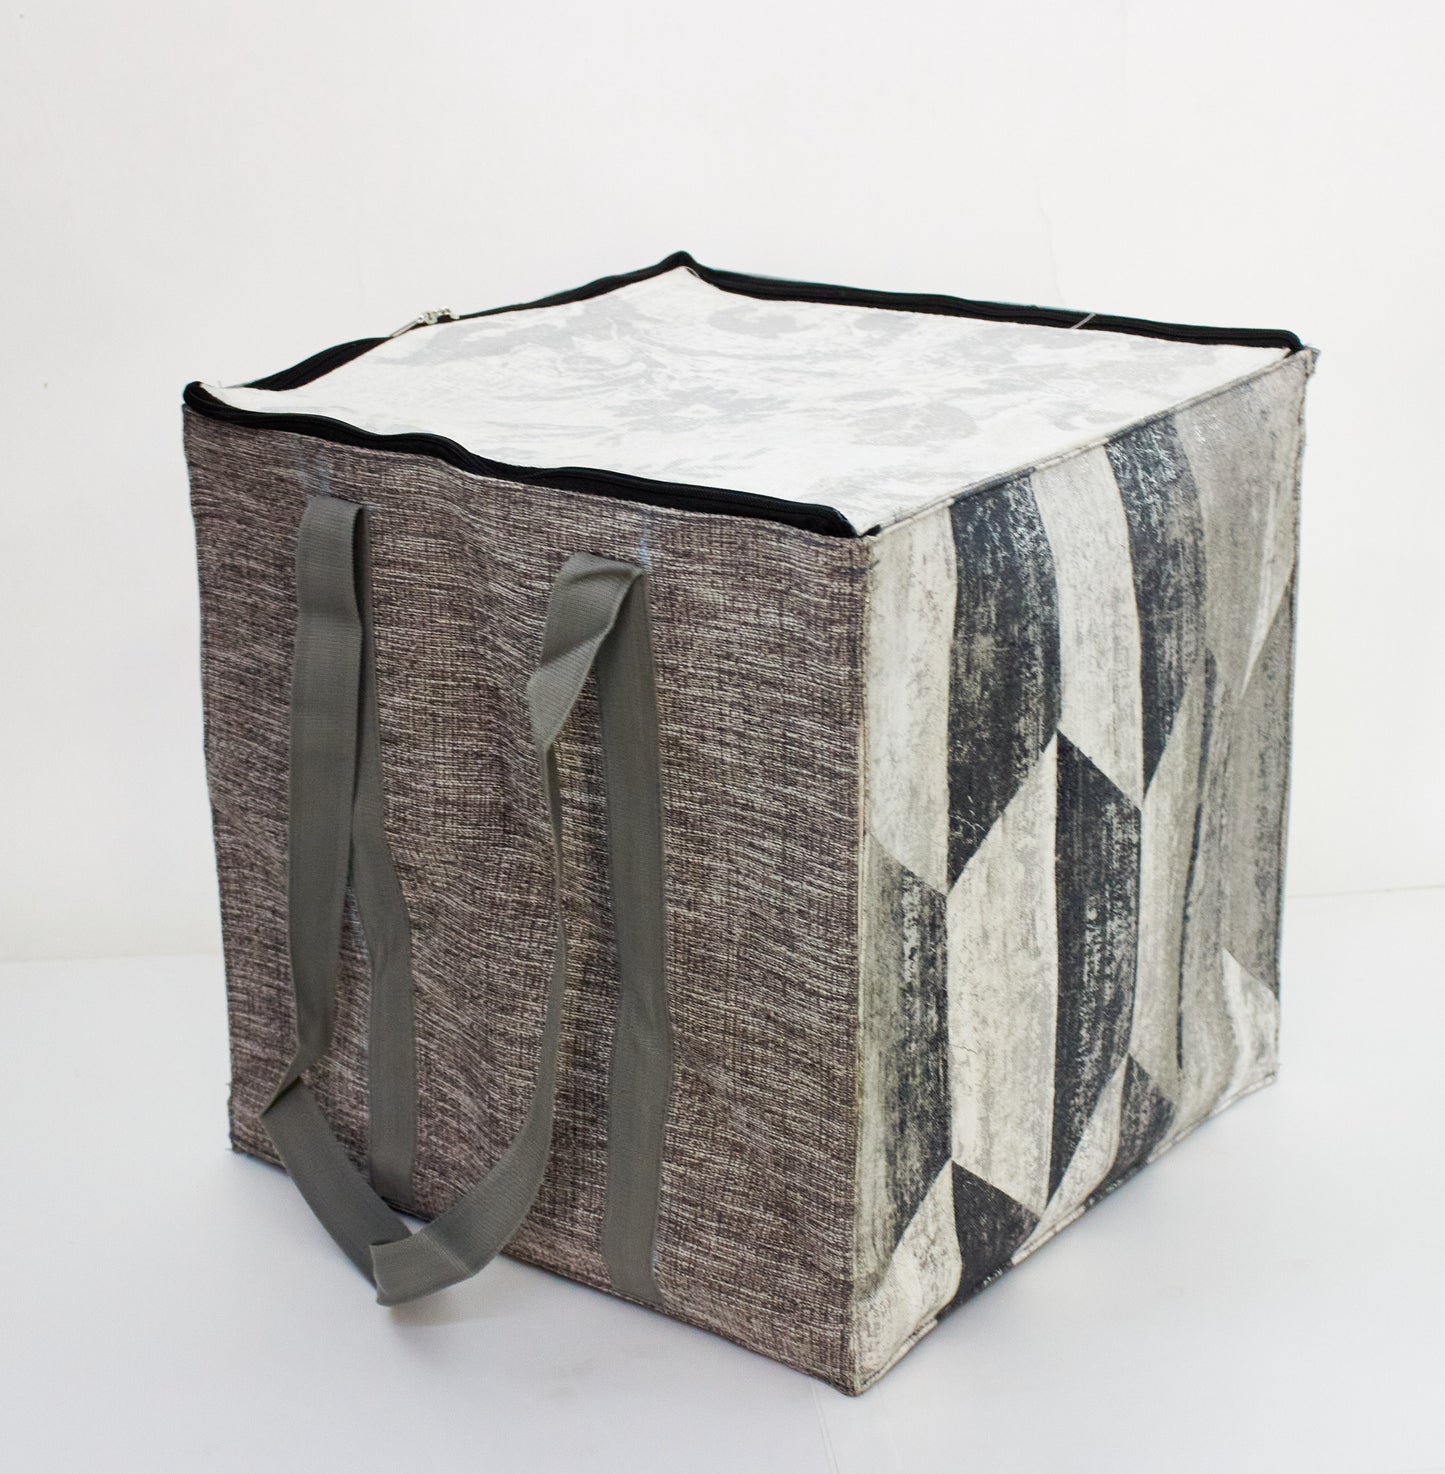 Black & White with Grey Handle -Foldable Box Bag - Made by People with Disabilities